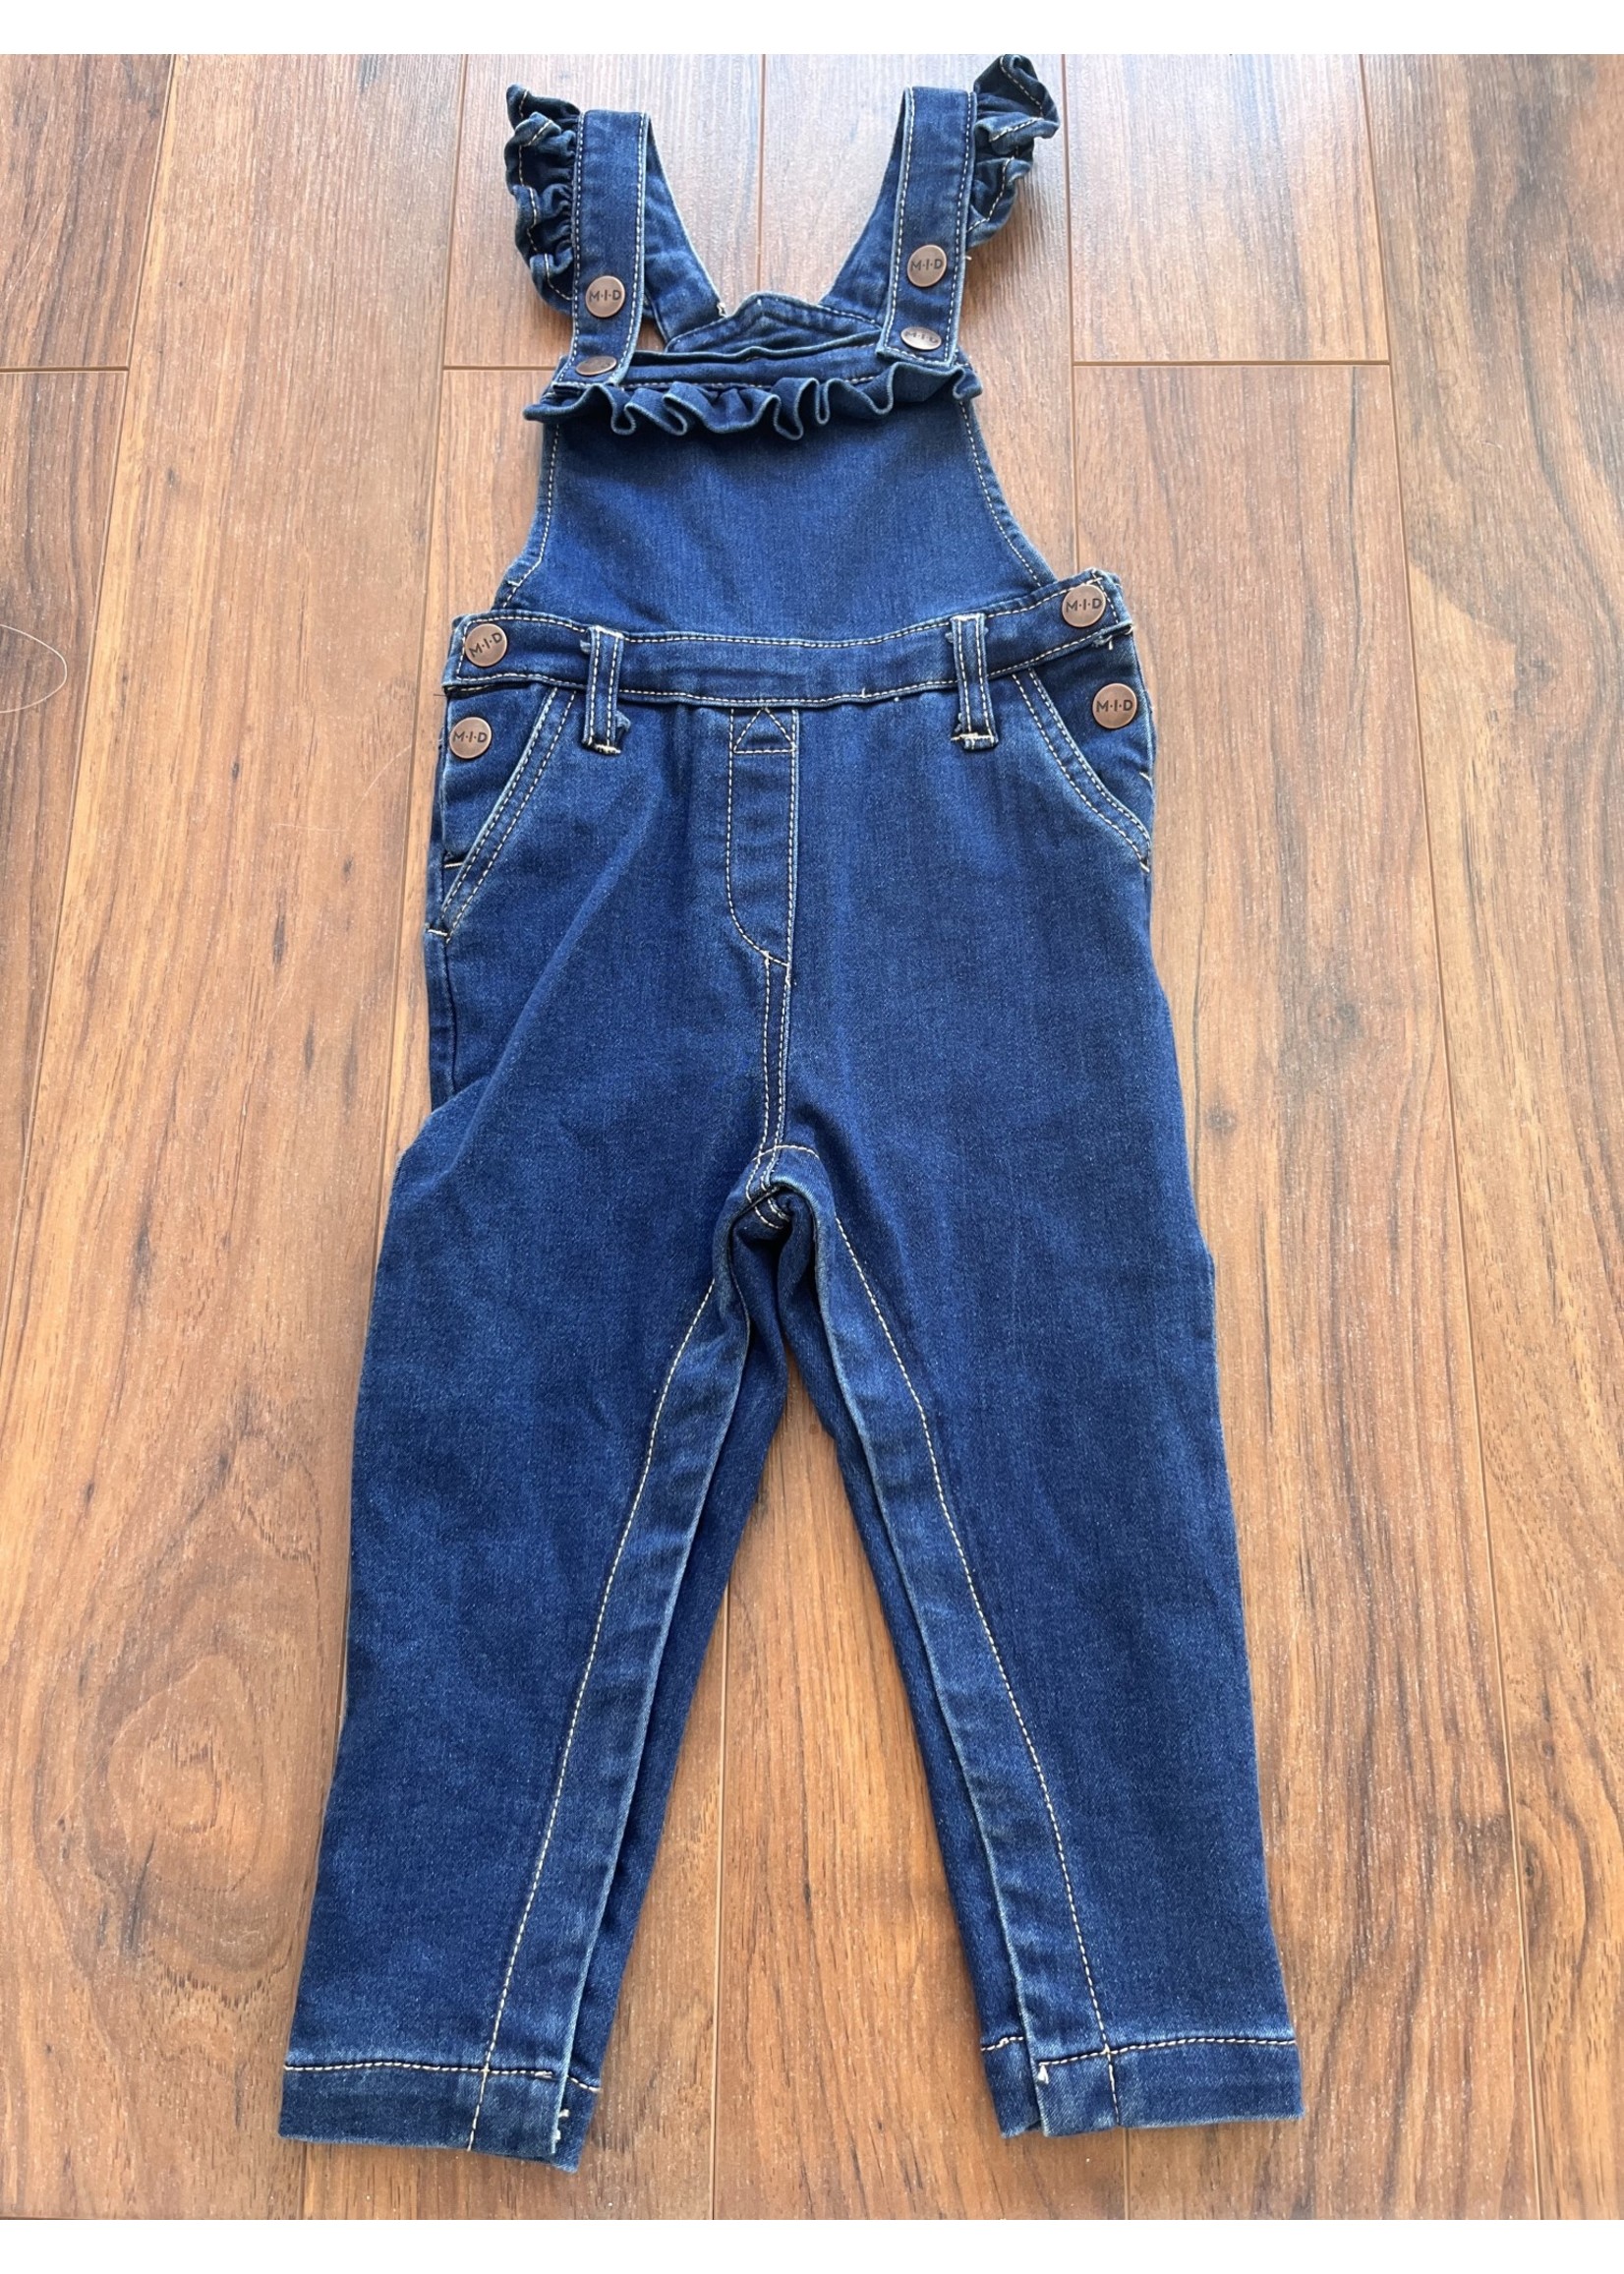 MID RUFFLE JEAN OVERALL